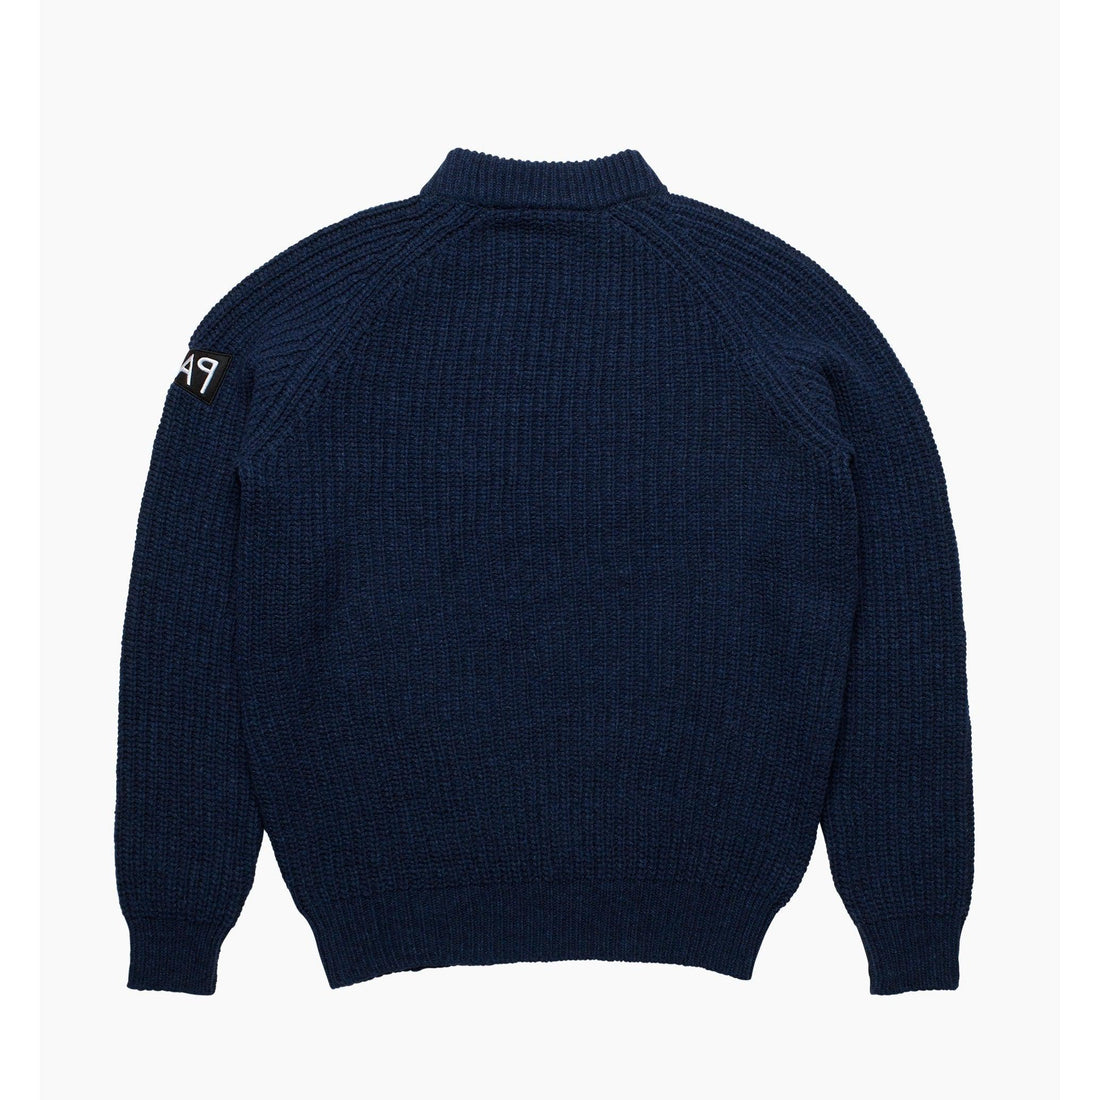 BY PARRA - MIRRORED FLAG LOGO KNITED PULLOVER - BLUE